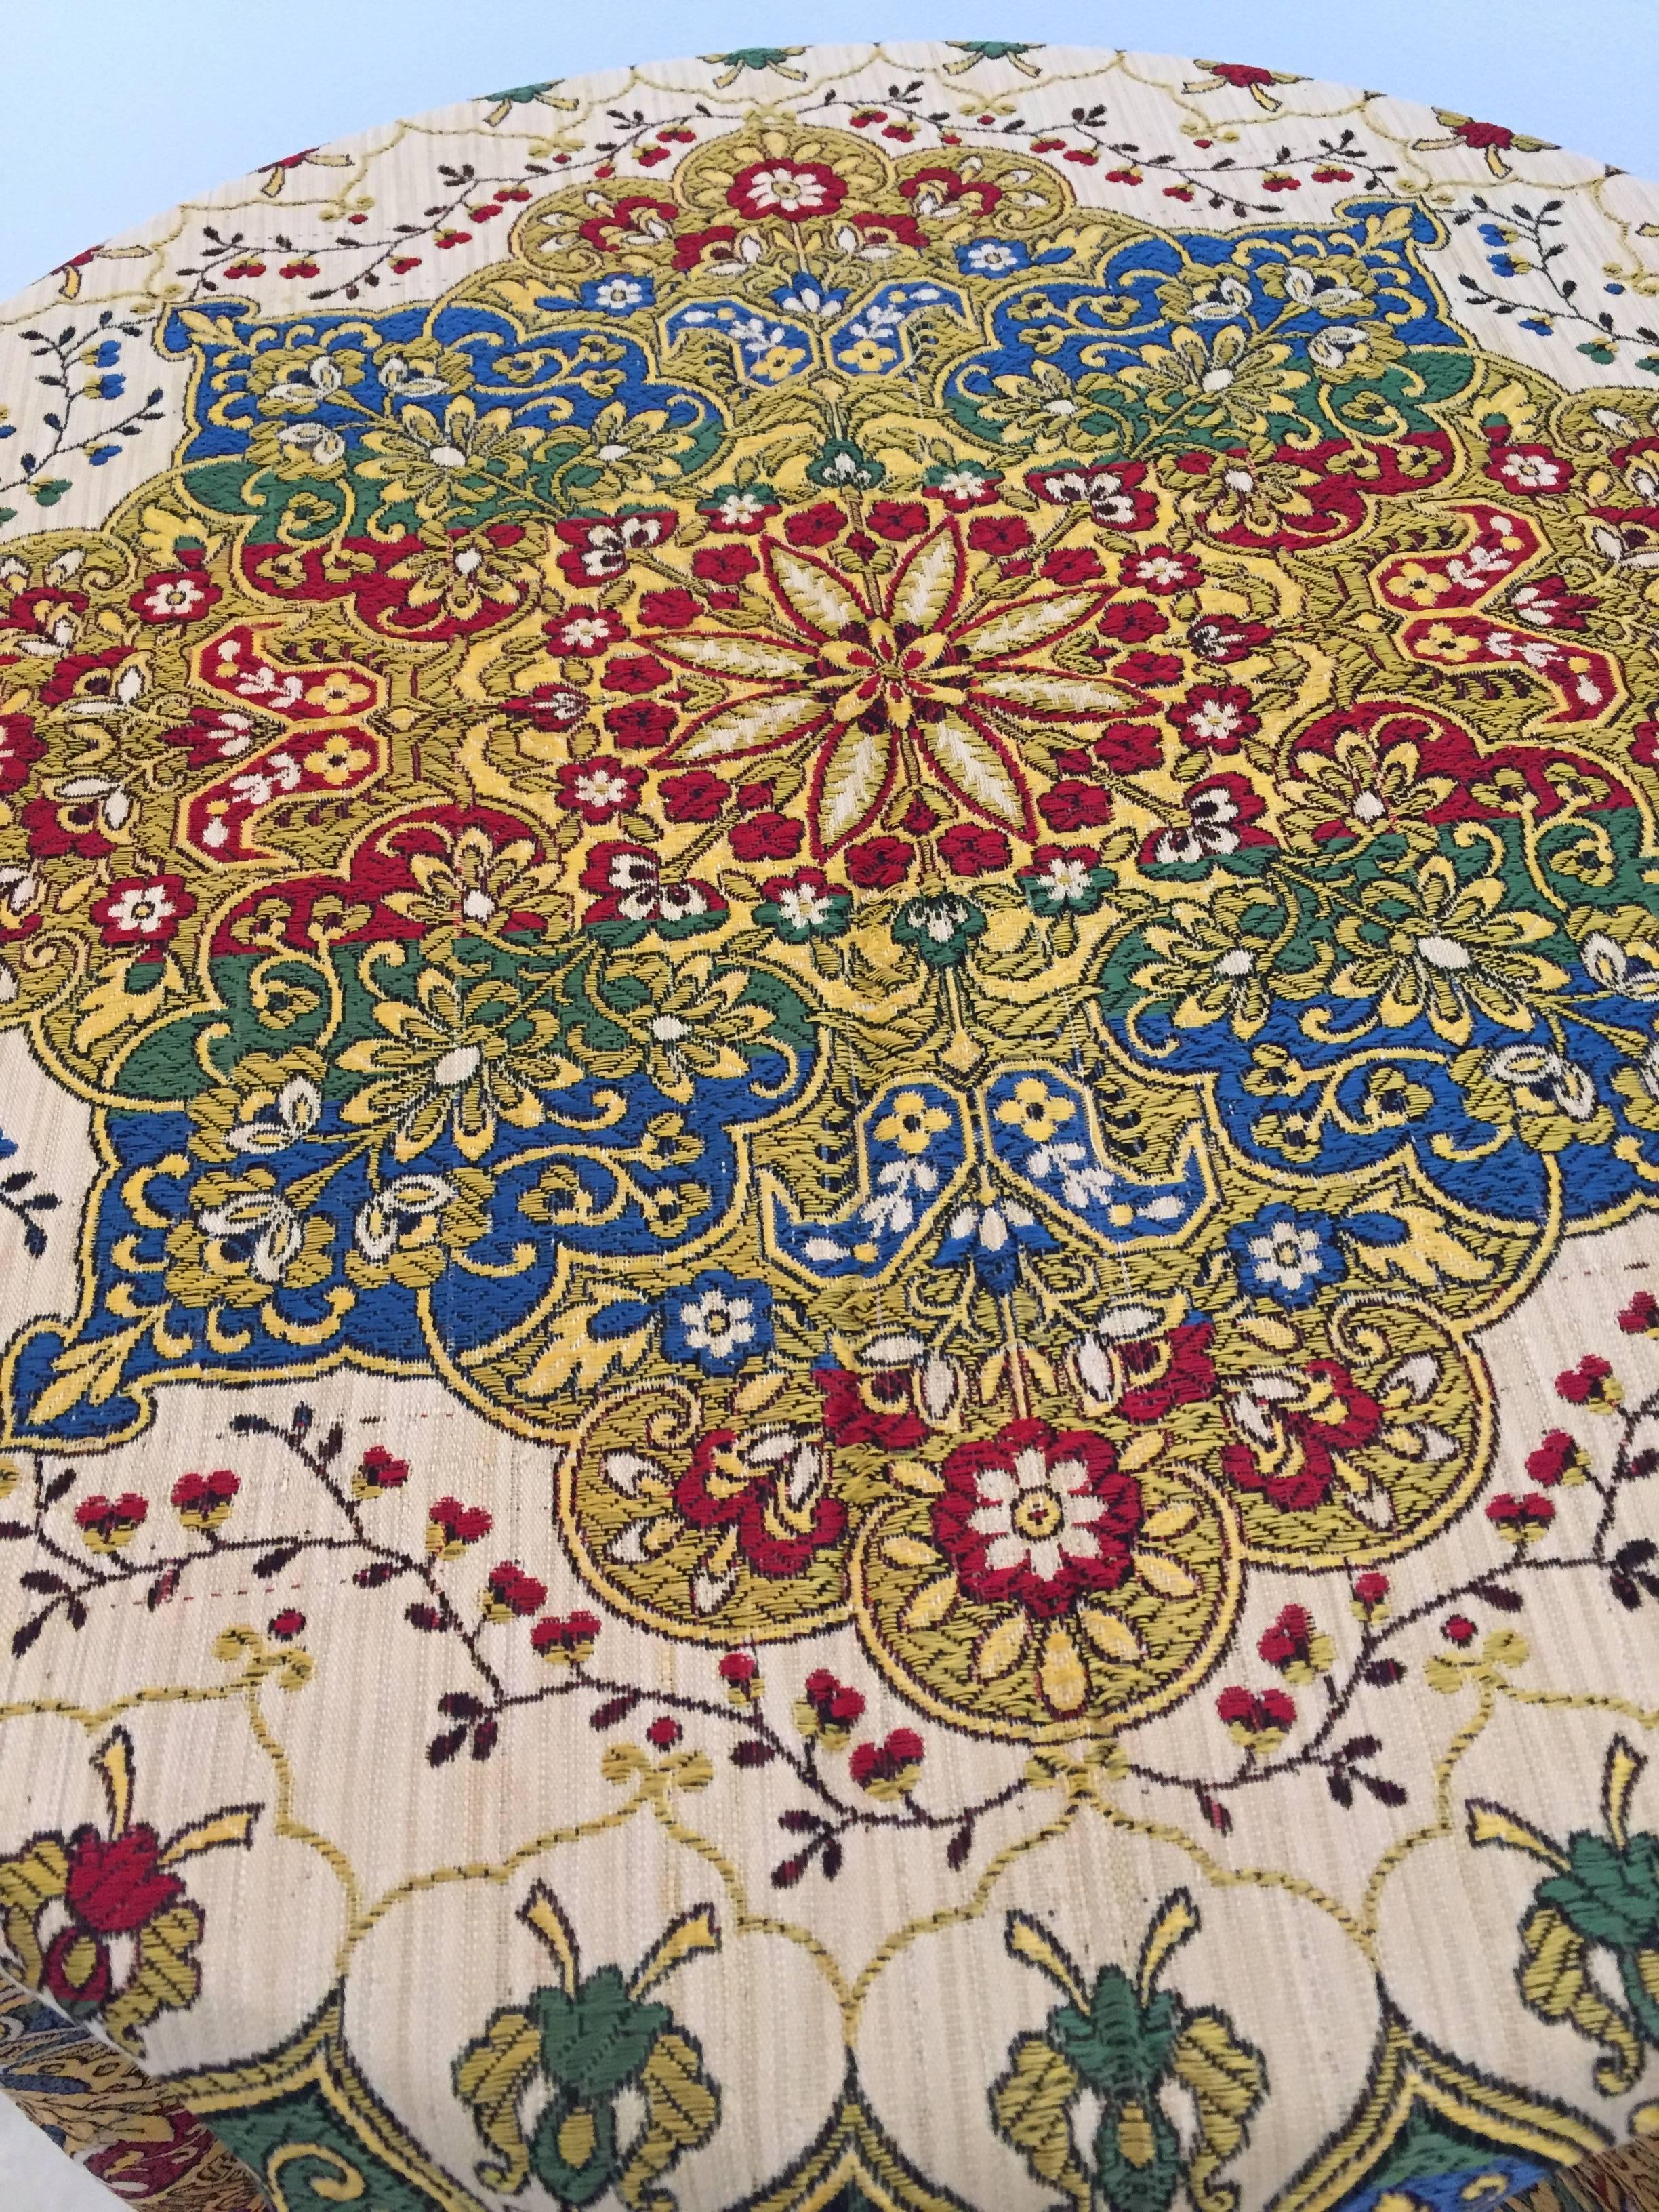 Granada, Islamic Spain, great square textile with ivory color fringes featuring Moorish floral designs and calligraphy Arabic writing.
Colors are earth tone in green, ivory and deep Moroccan red.
Could be used as a piano shawl, decorative Spanish